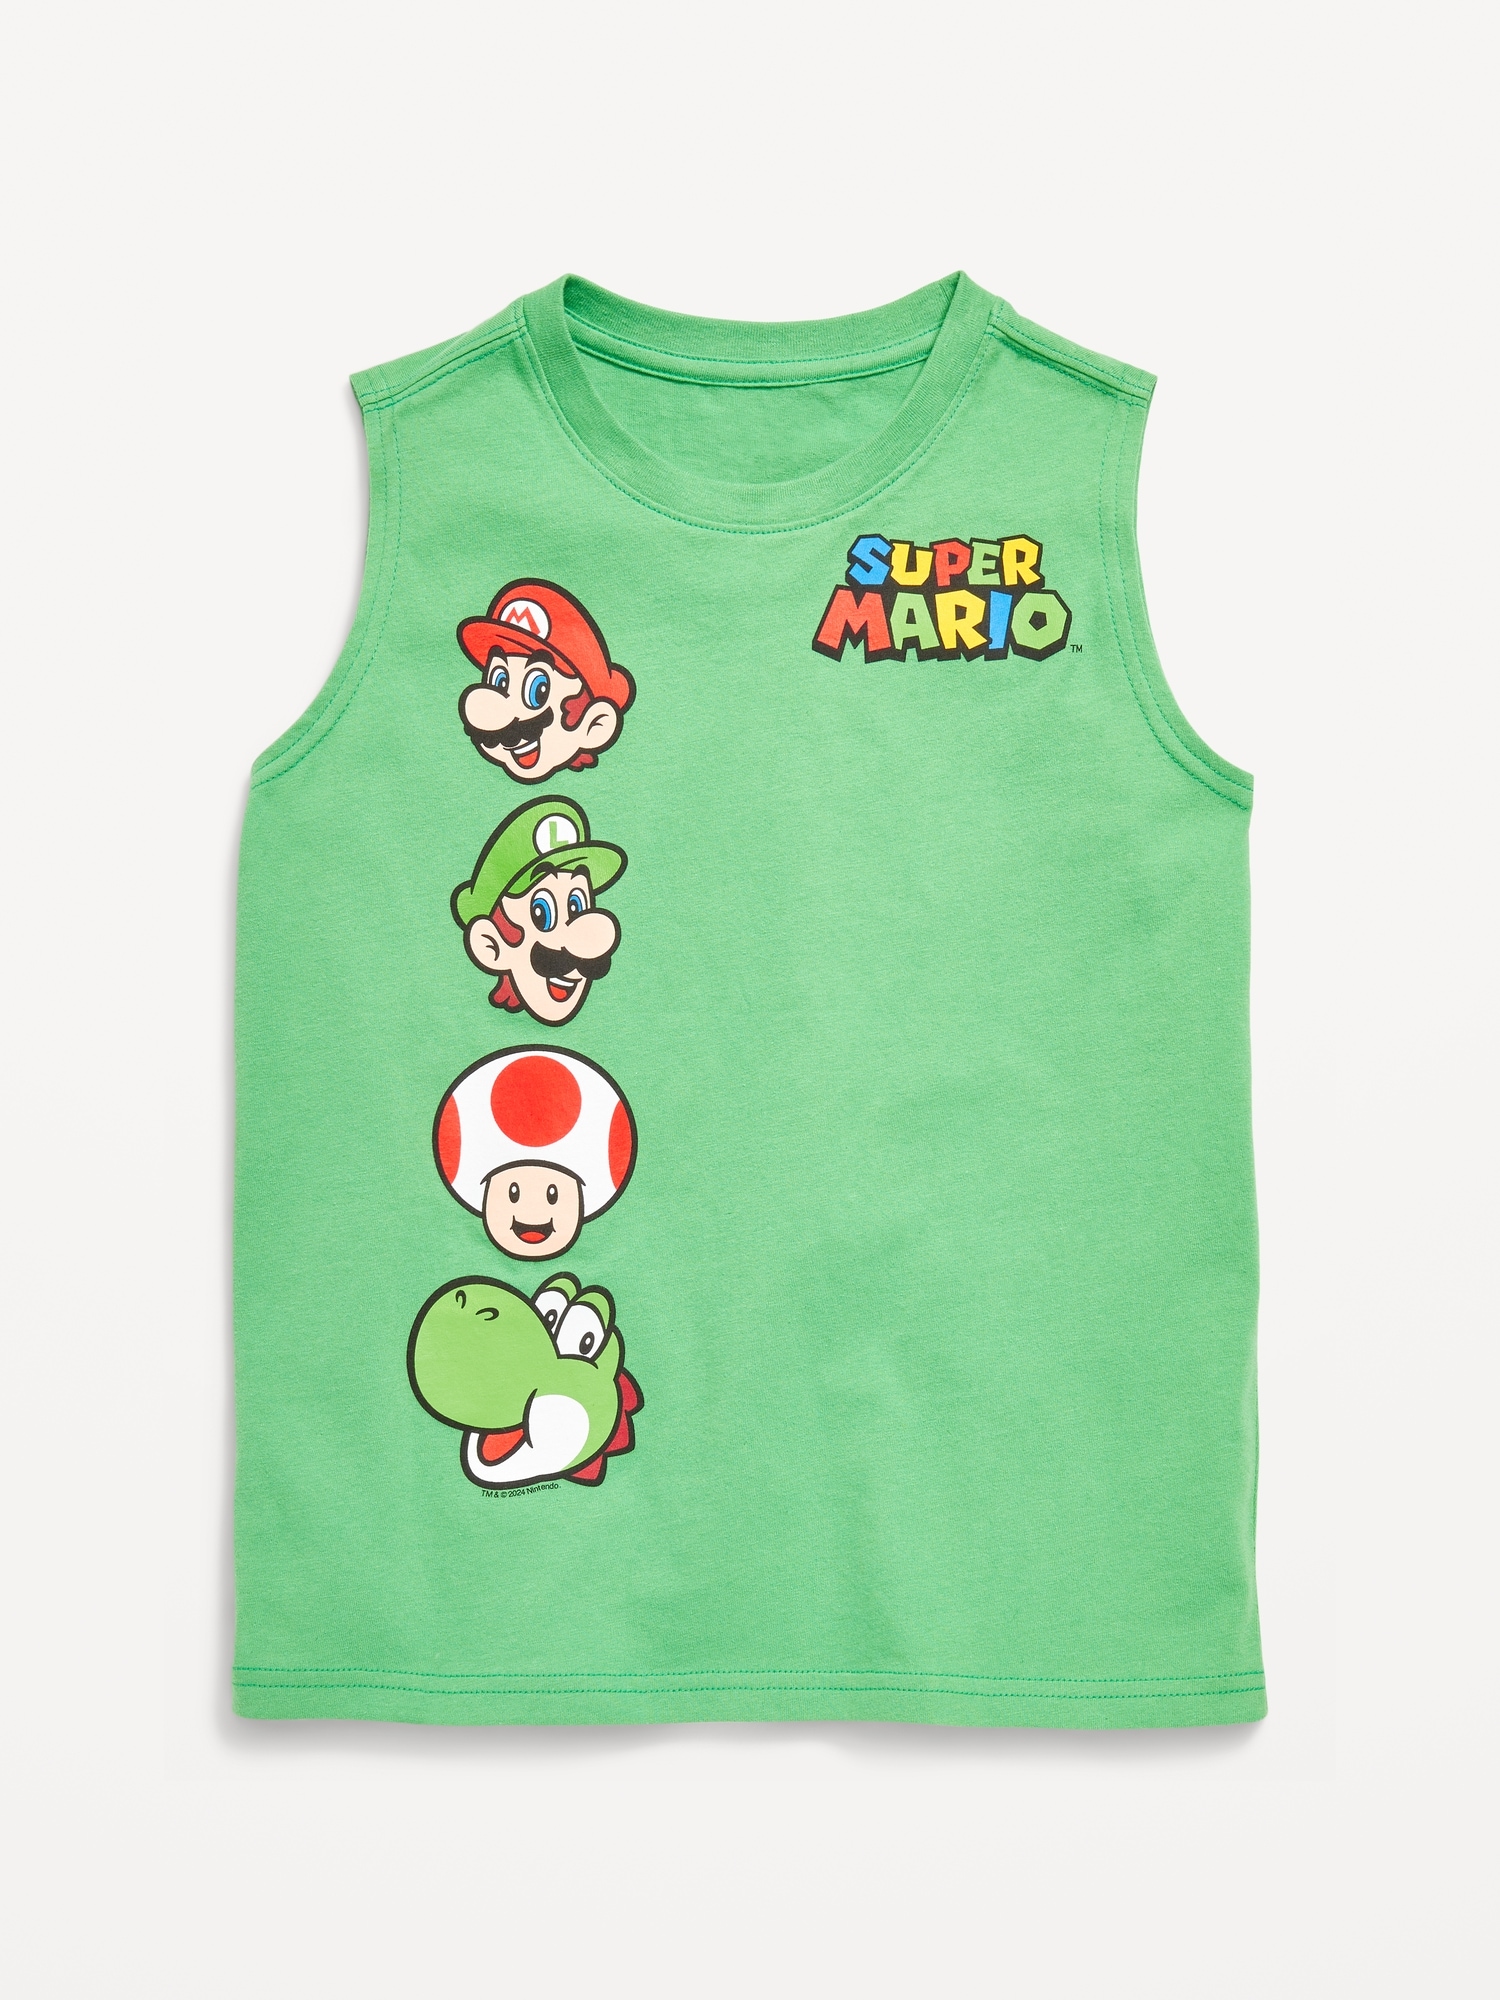 Super Mario Gender-Neutral Graphic Tank Top for Kids